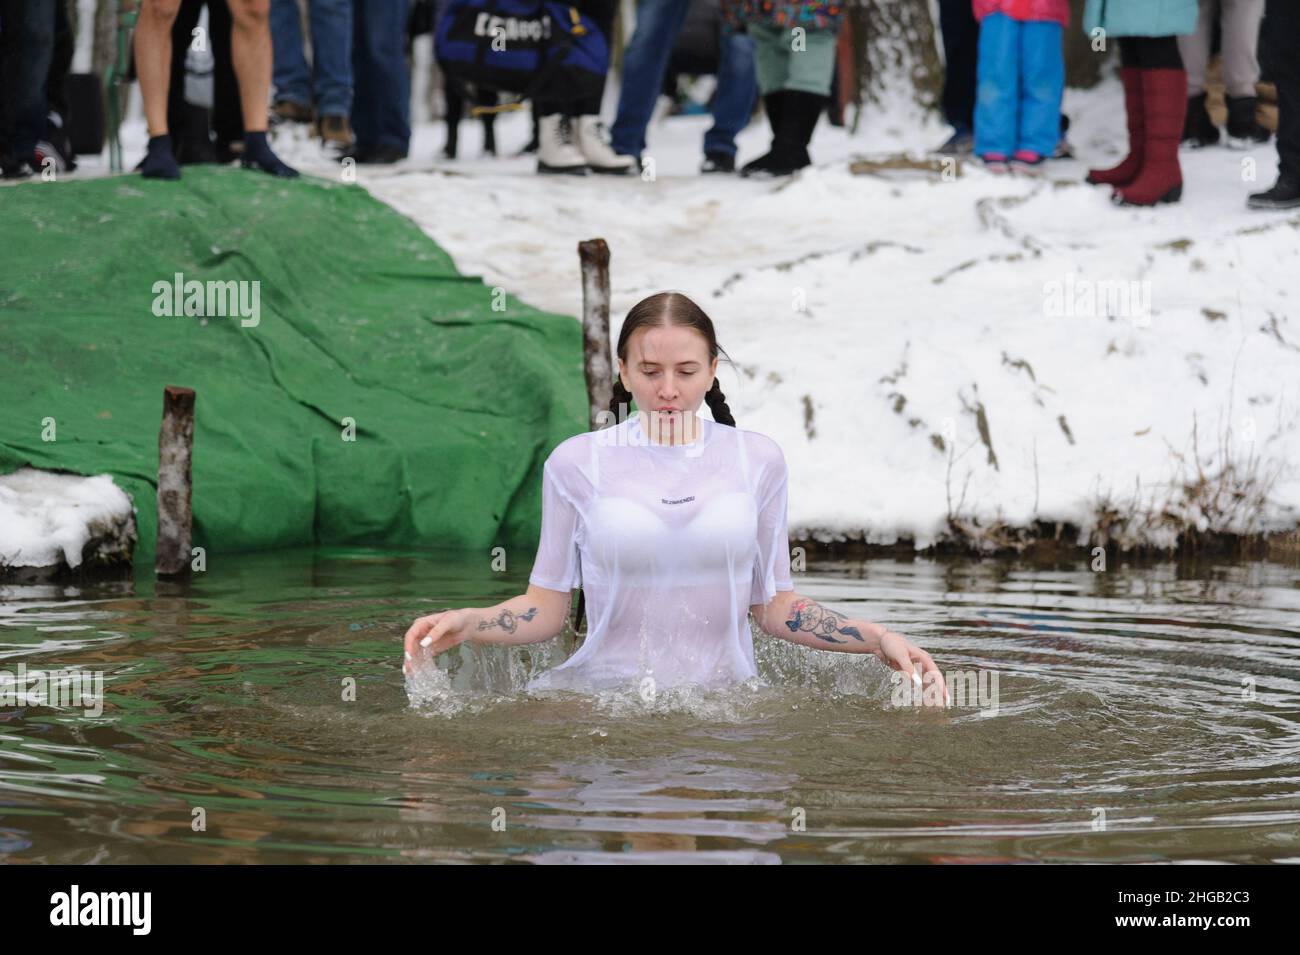 People of orthodox religion bathe in cold water during the celebration of Epiphany. People believe that water has special healing properties and can be used to treat various diseases, and many of them take ice baths as part of its celebration. Stock Photo